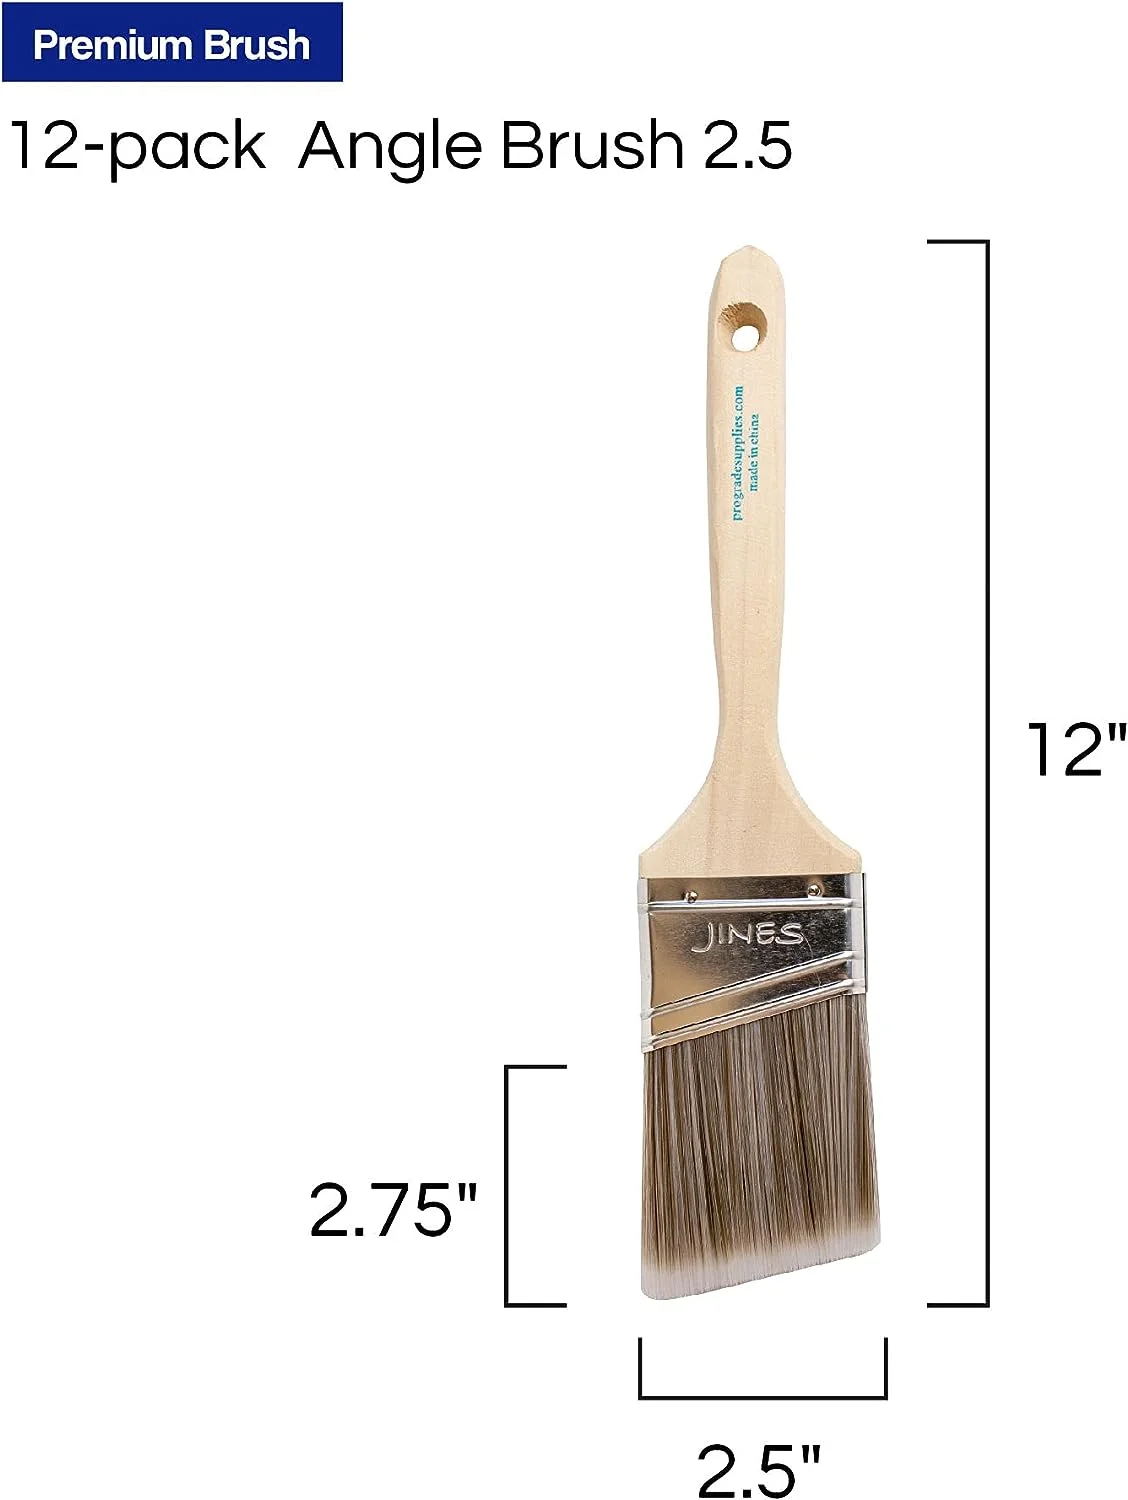 Pro Grade Angle Brushes,time,durability